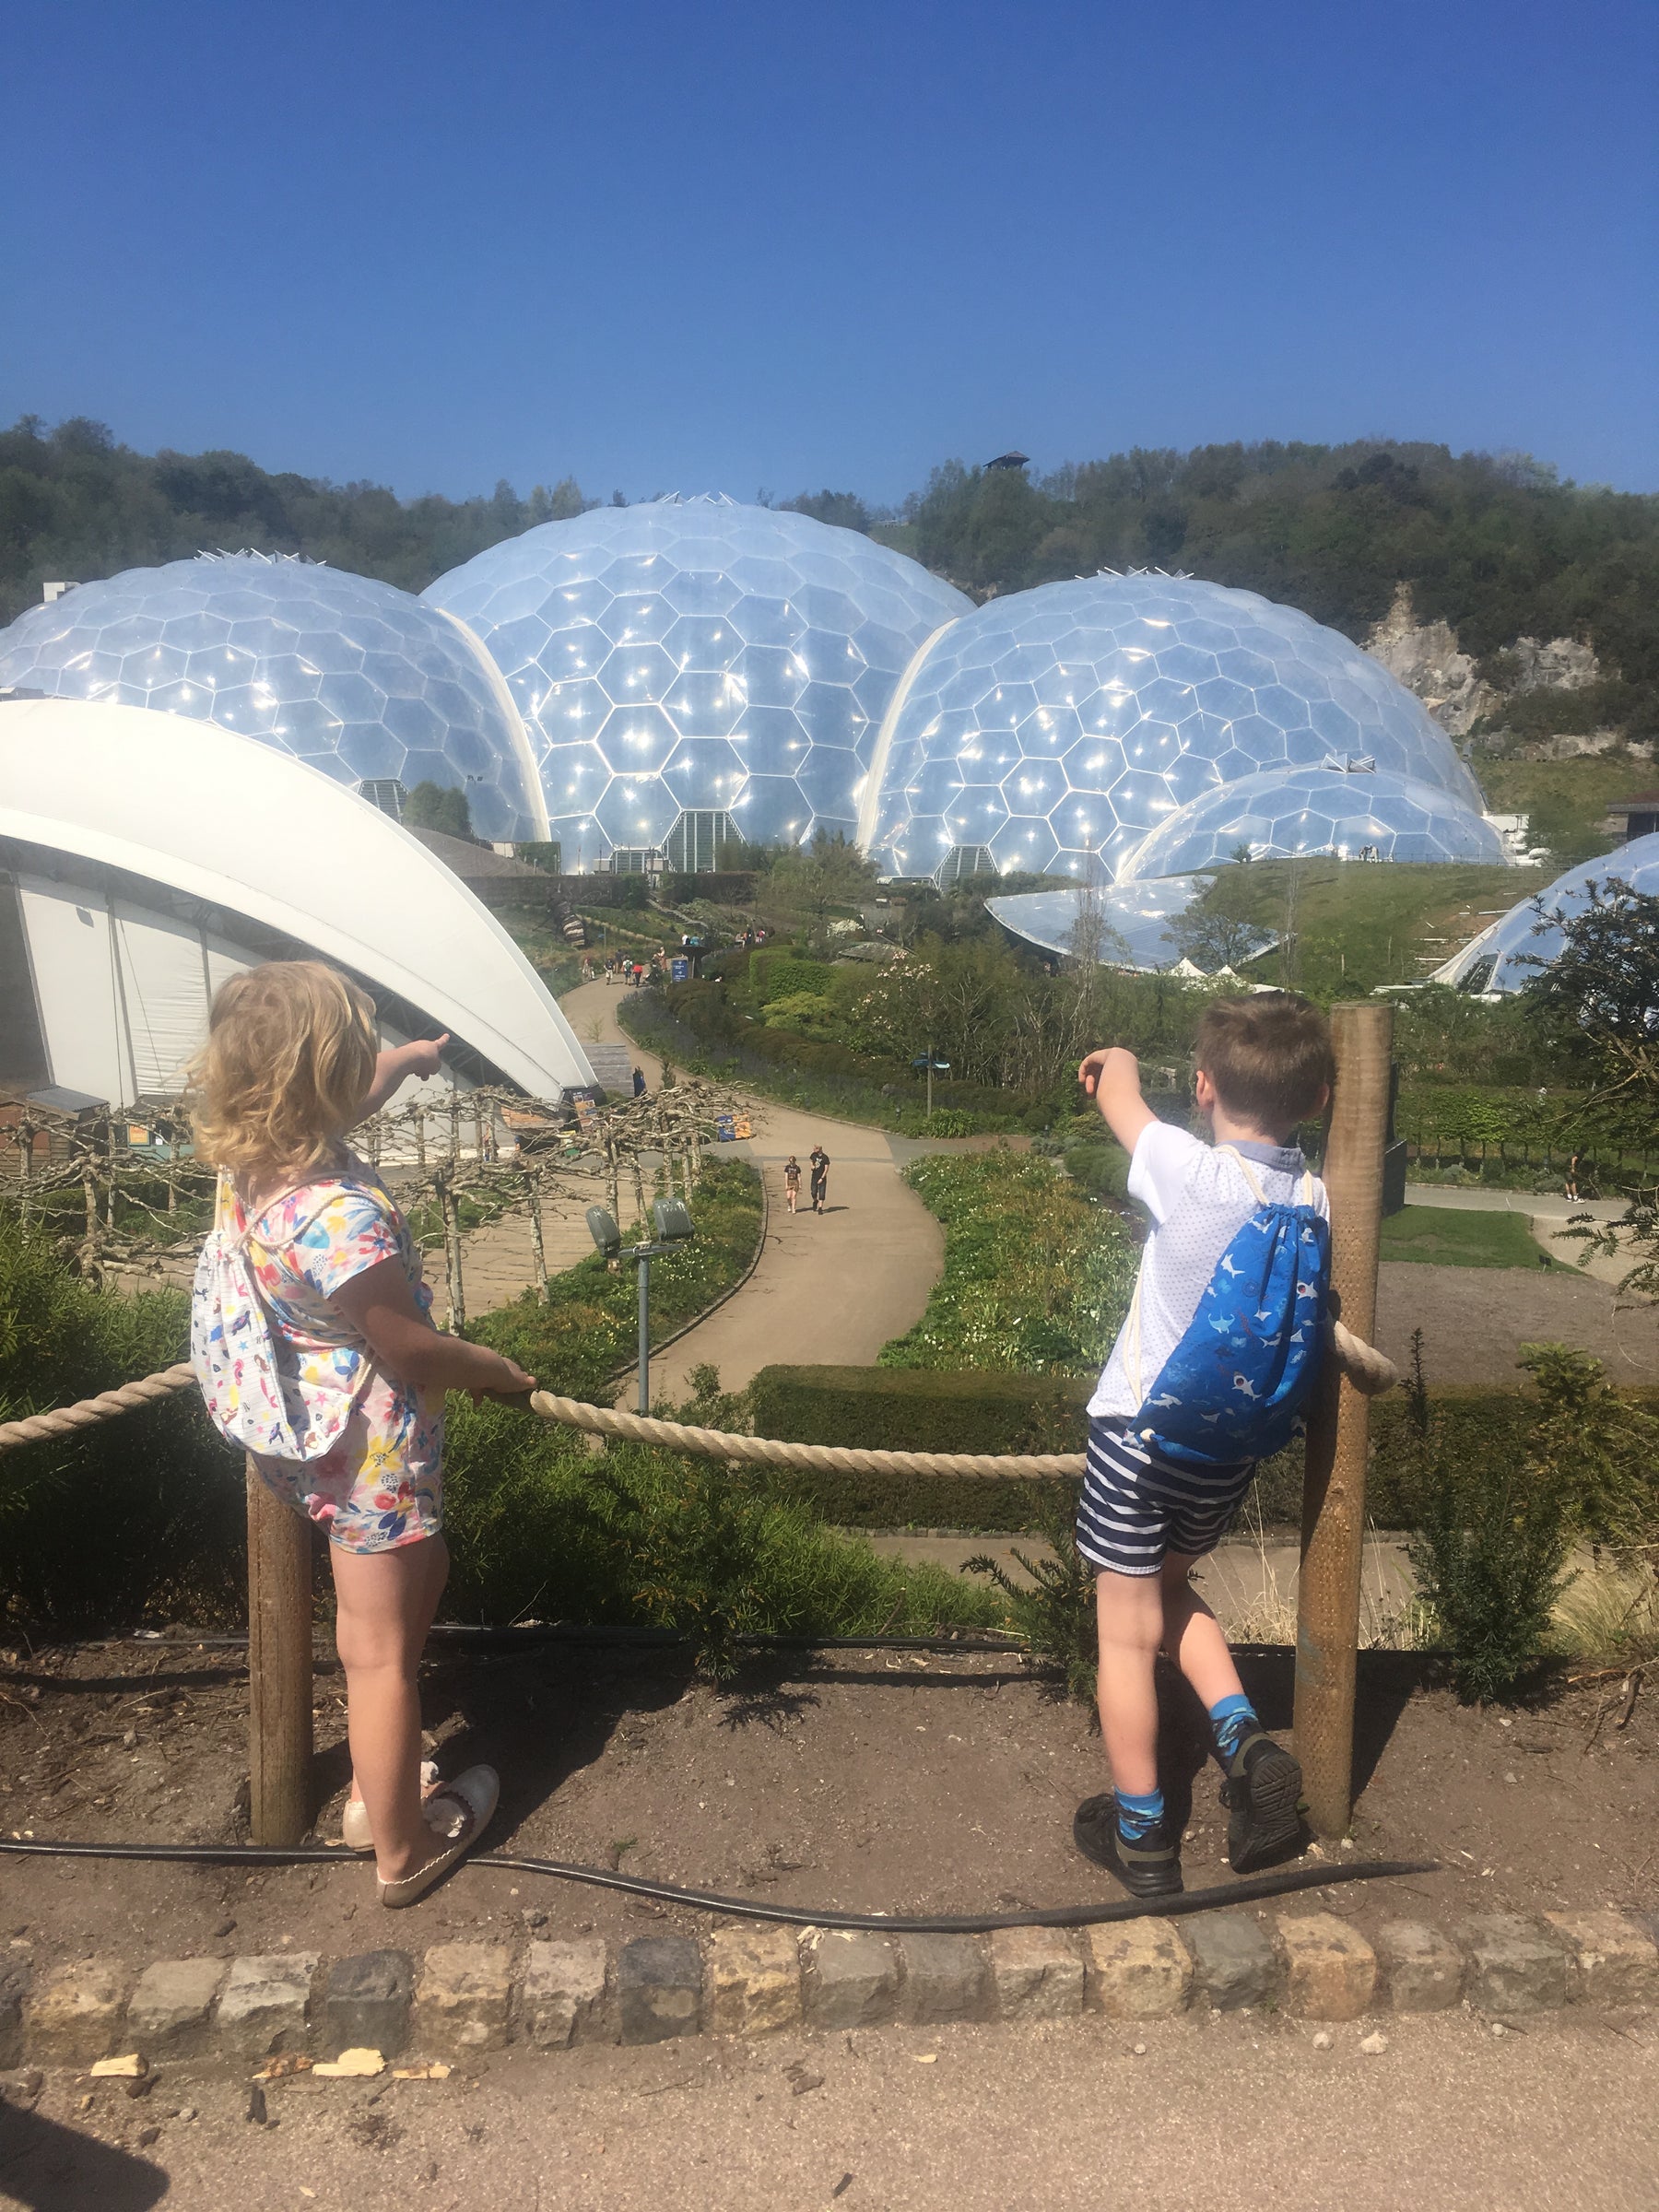 Our drawstring bags take a trip to the Eden project!